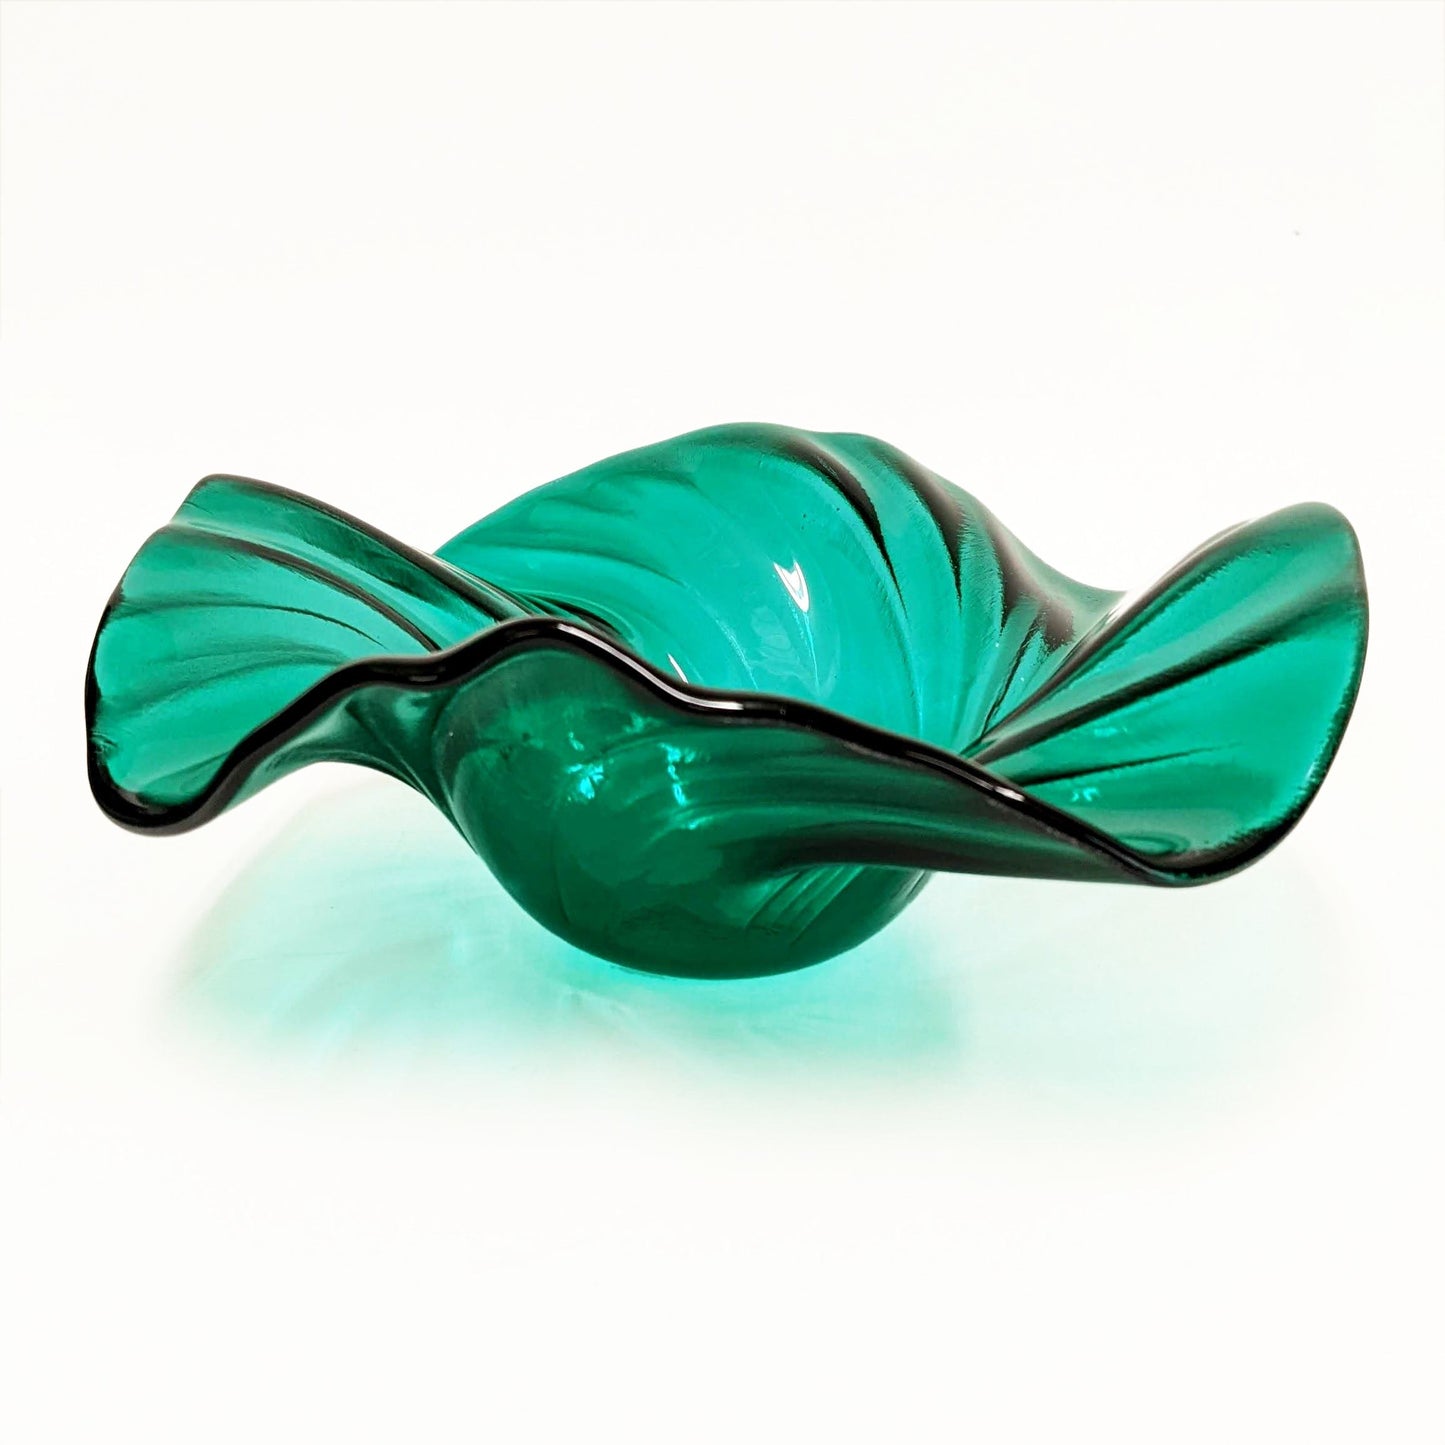 Teal Blue Green Glass Art Wave Bowl | Handcrafted Decorative Bowls